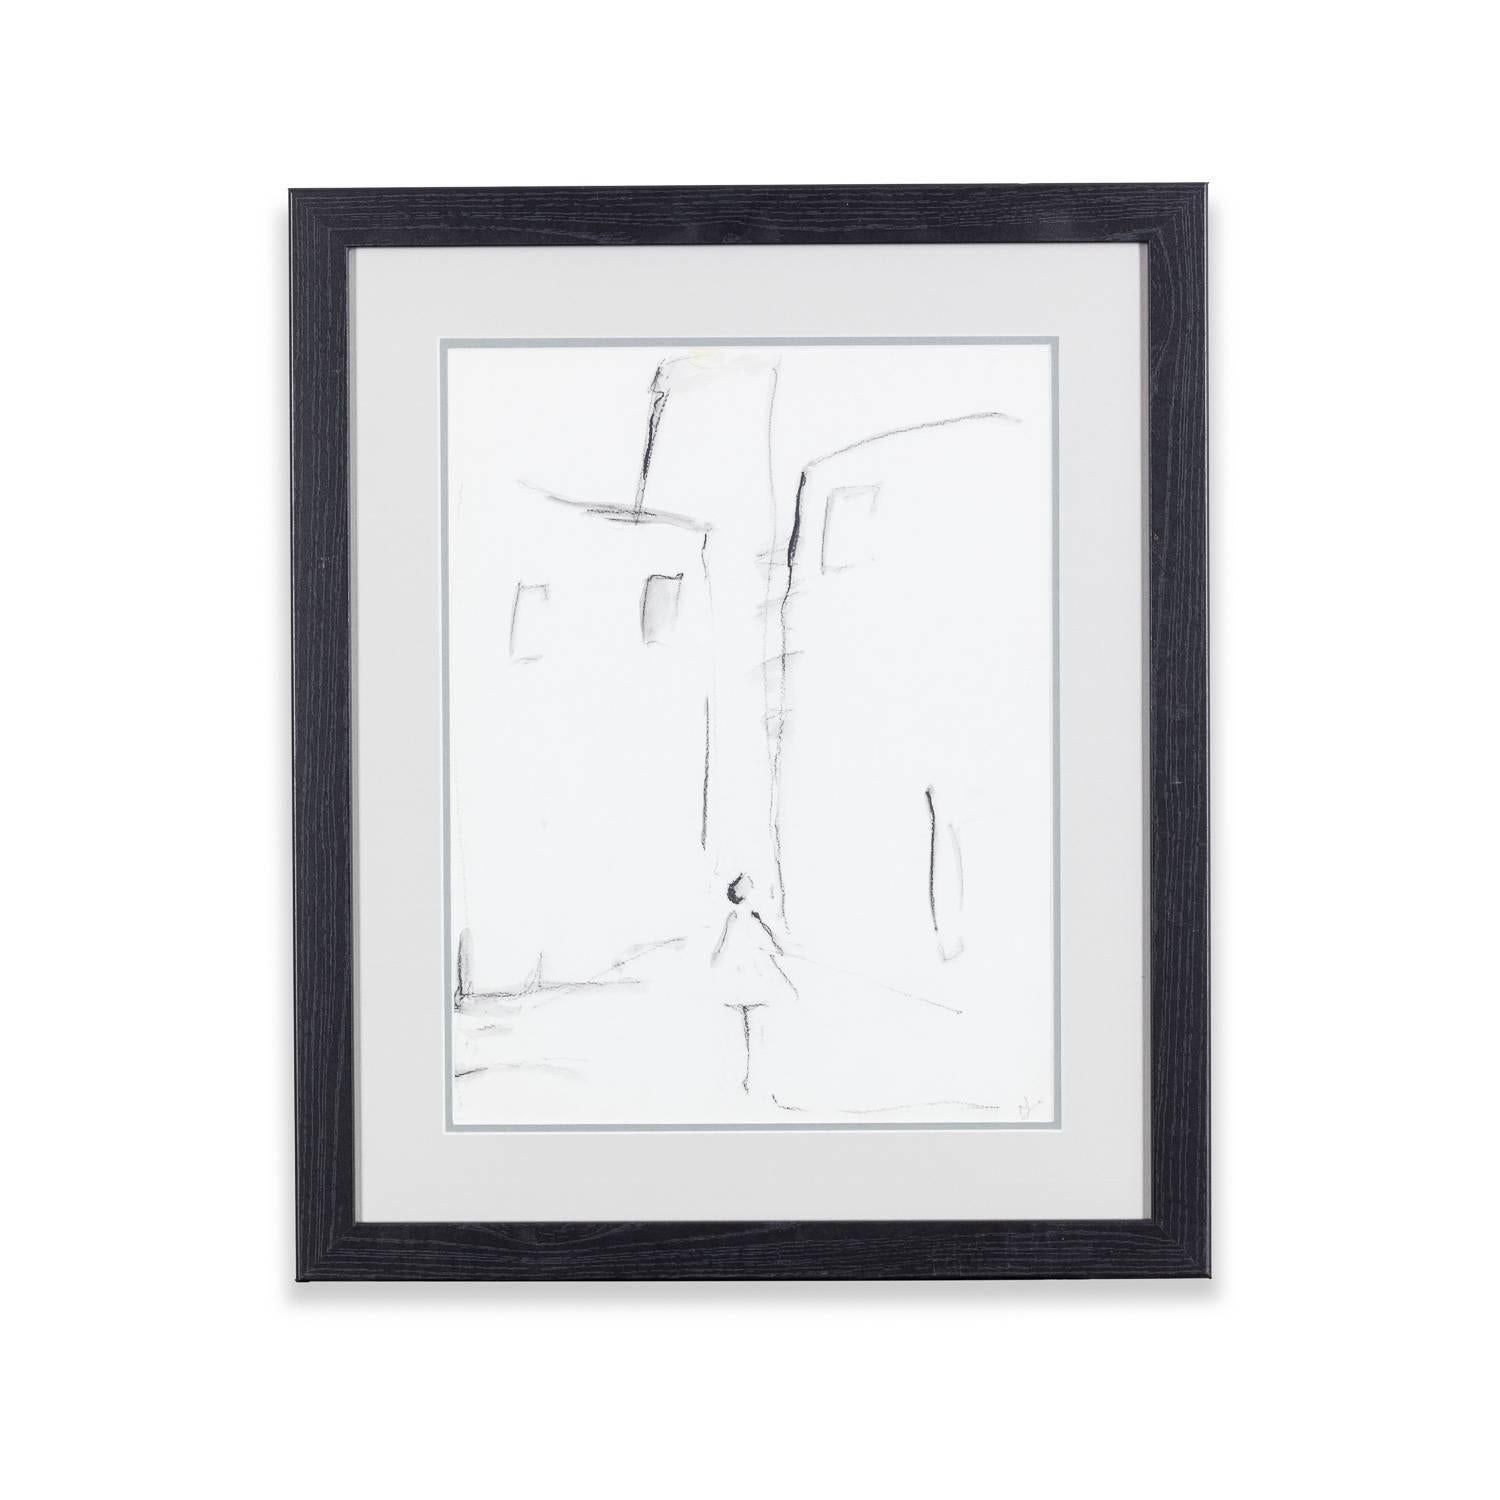 Framed and mounted sketch by Nicola Hallett.

There are three different sketches, which are for sale individually.

The frame measures 52.5cm by 44cm and the picture measures 38cm by 29cm.